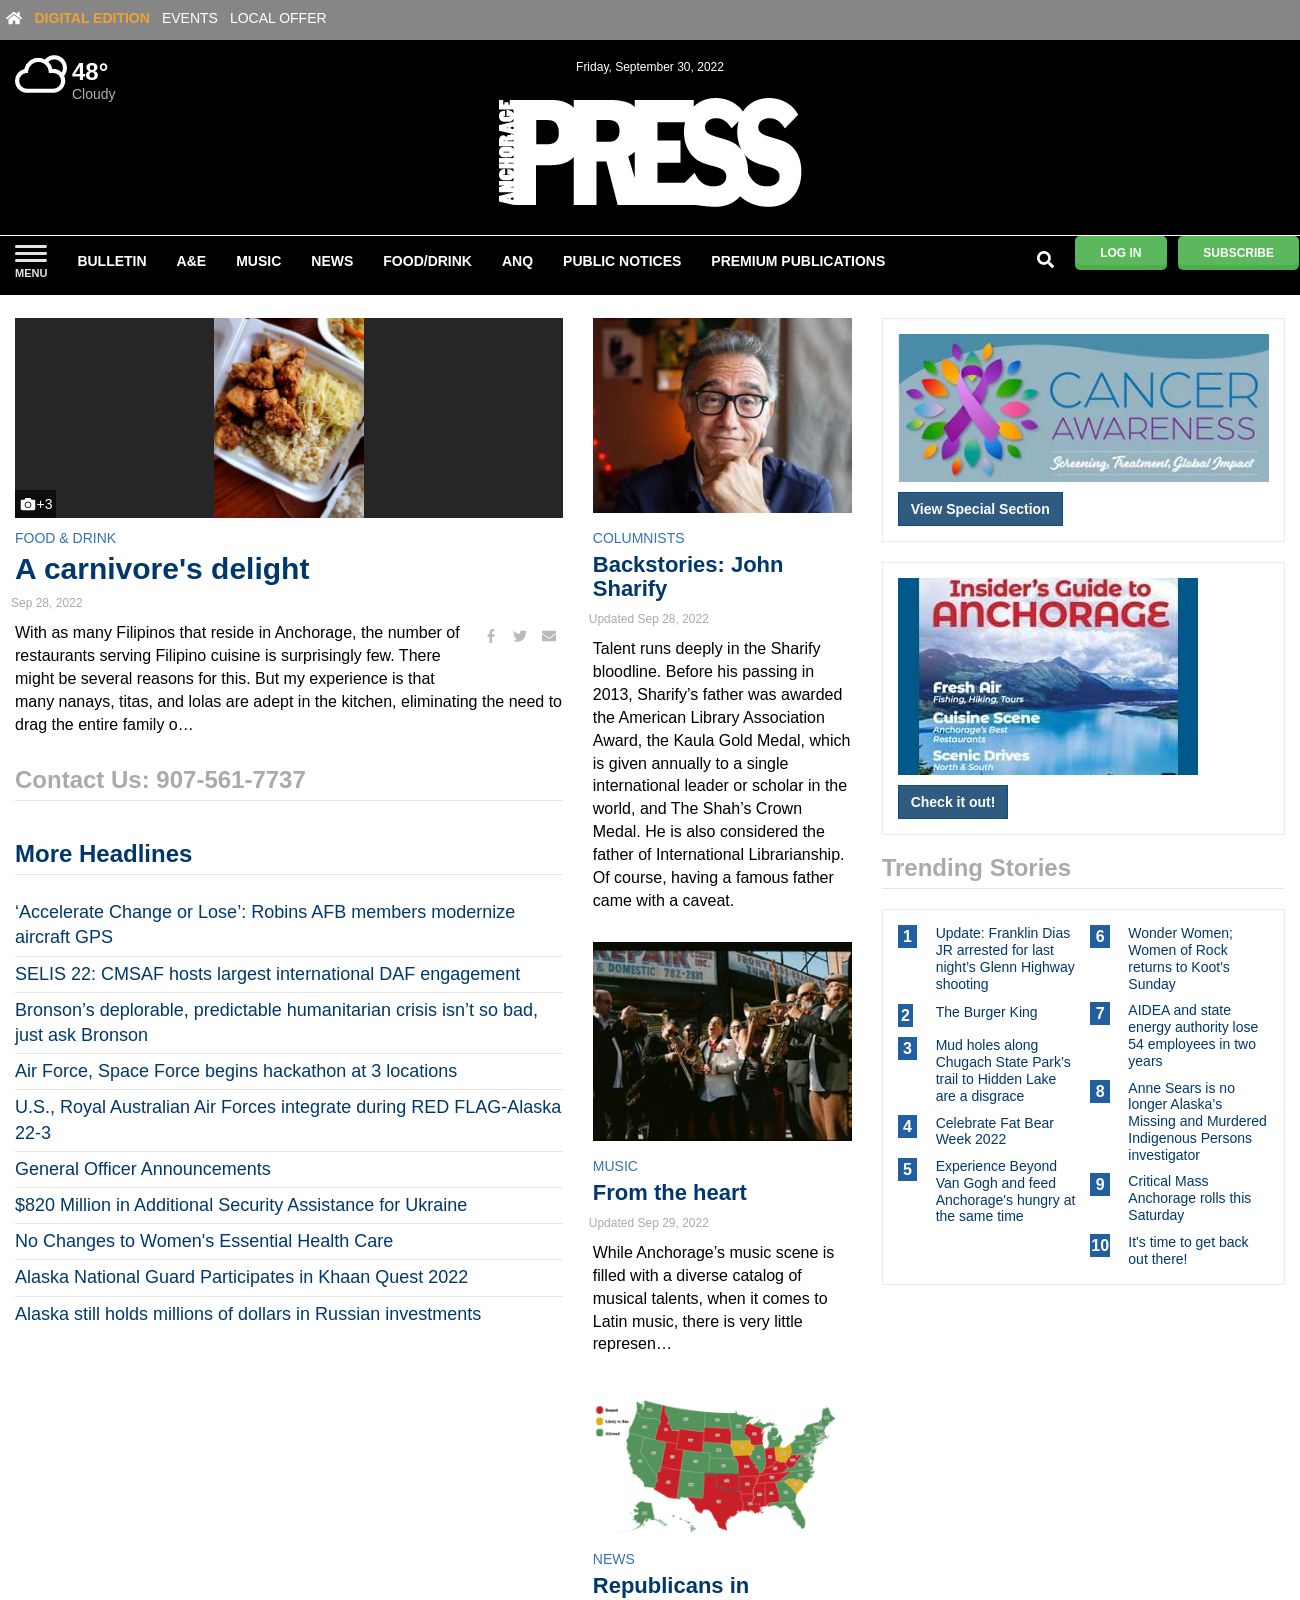 Anchorage Press at 2022-09-30 20:39:51-08:00 local time